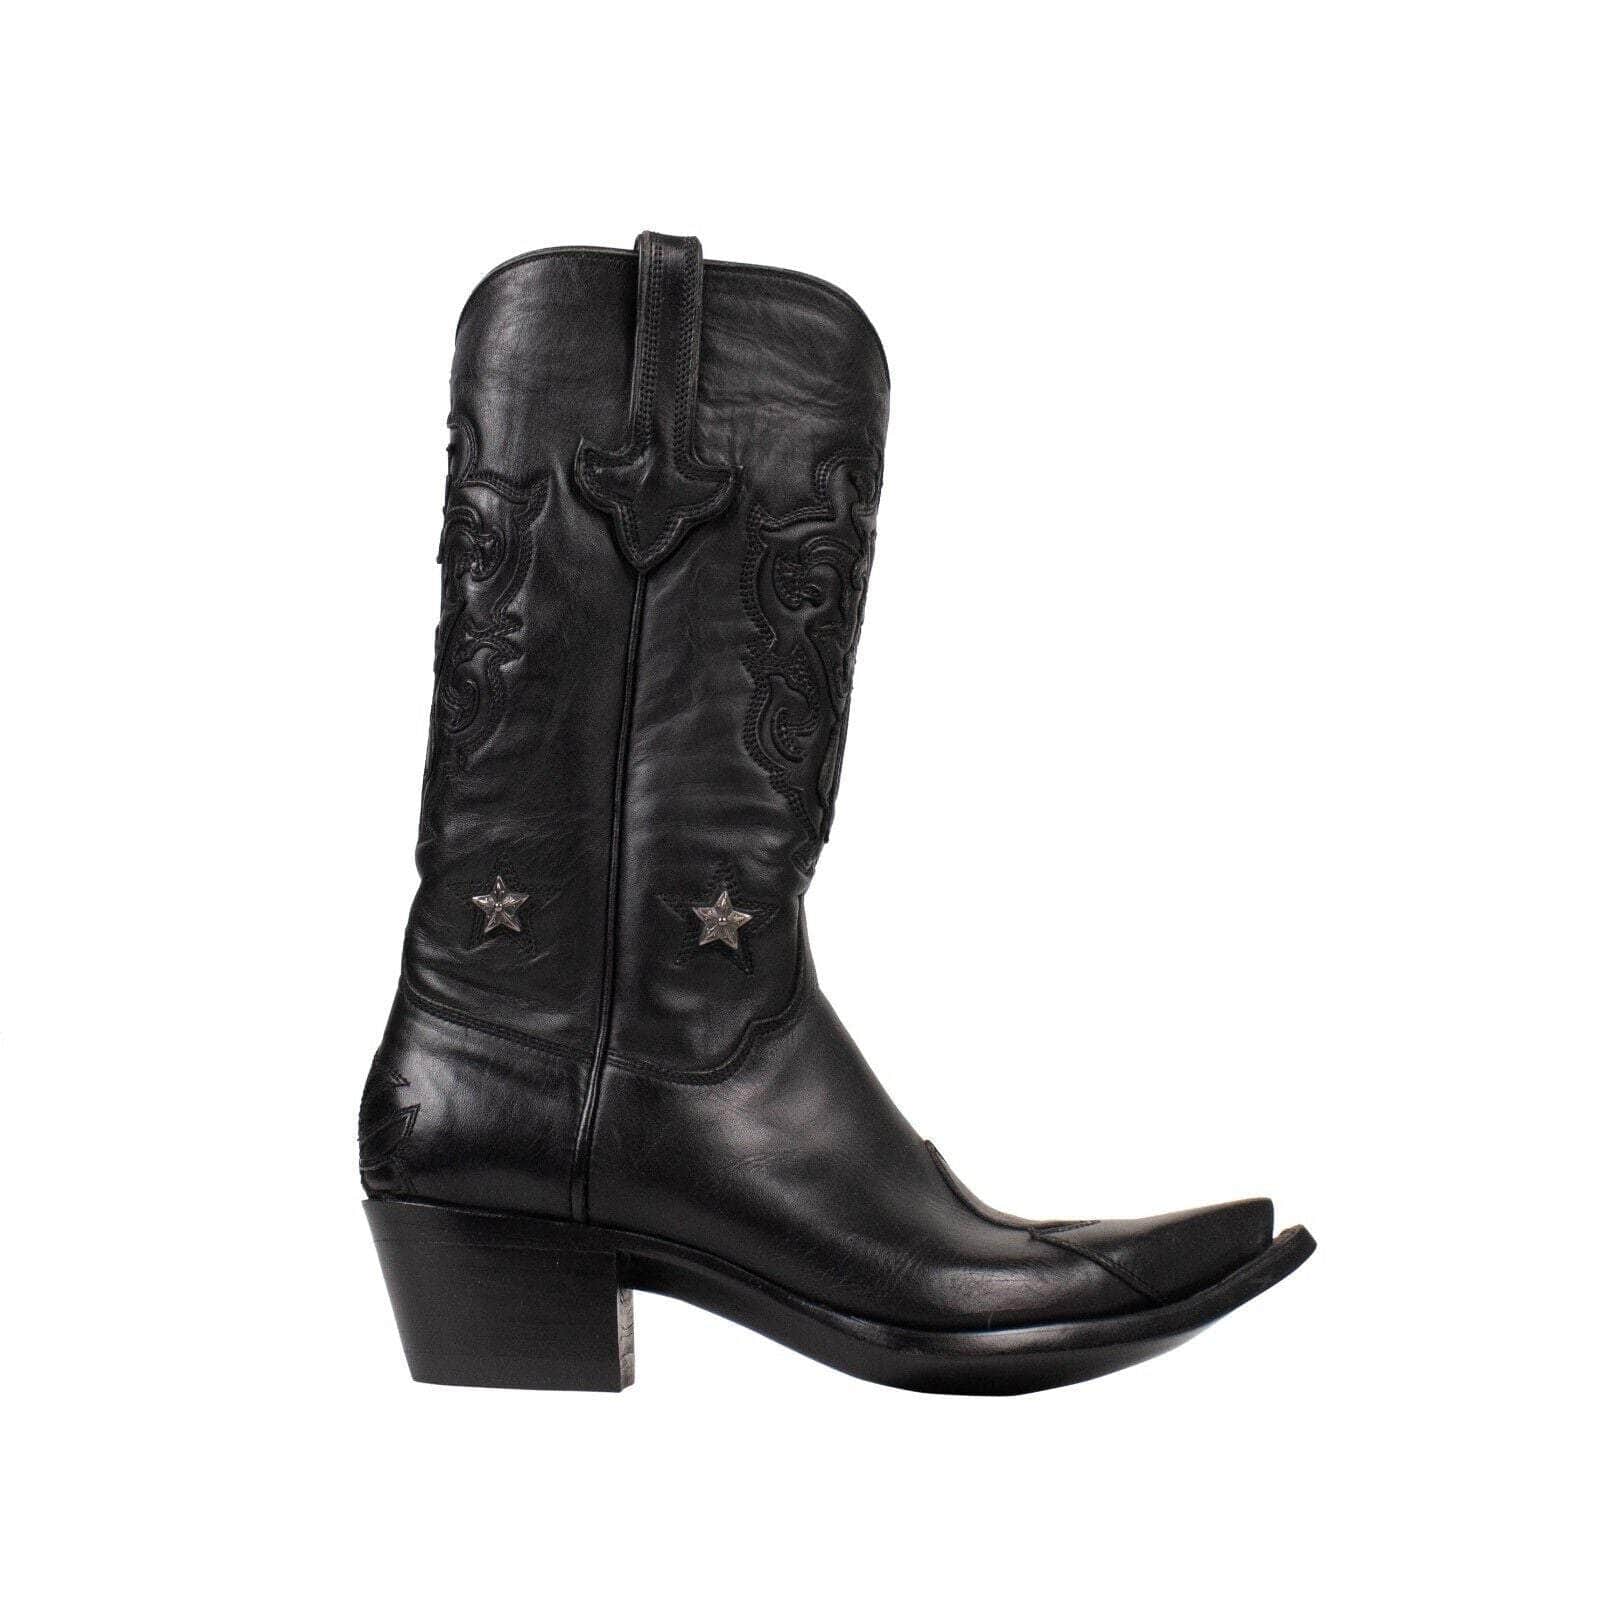 CHROME HEARTS channelenable-all, chicmi, chrome-hearts, couponcollection, gender-womens, main-shoes, over-5000, size-8-5 8.5 Black Leather Western Cowboy Boots 95-CRH-2002/8.5 95-CRH-2002/8.5